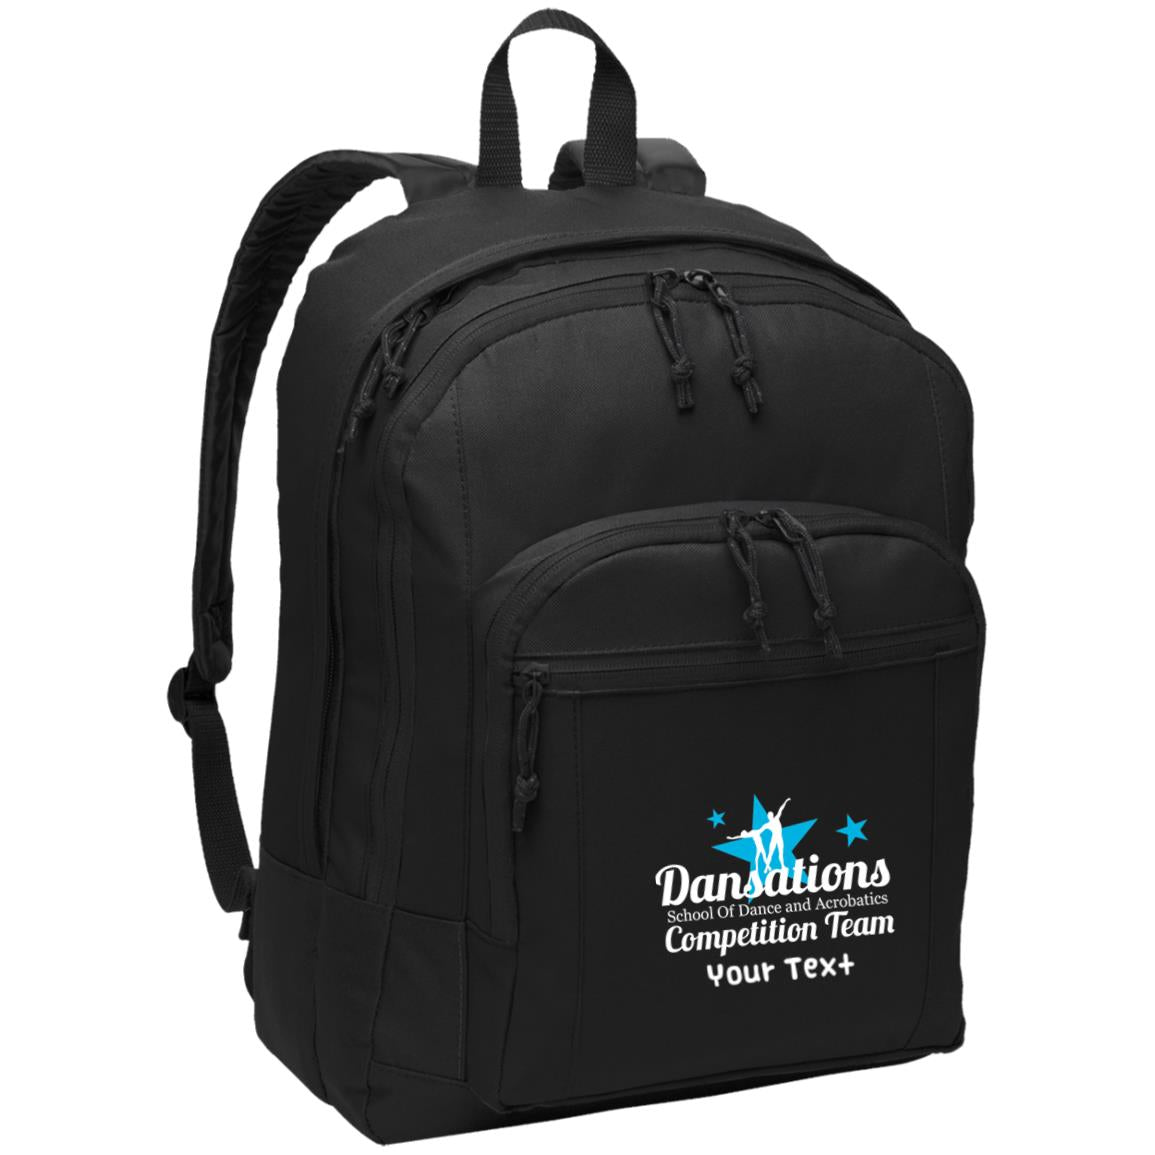 Dansations Competition Team Backpack